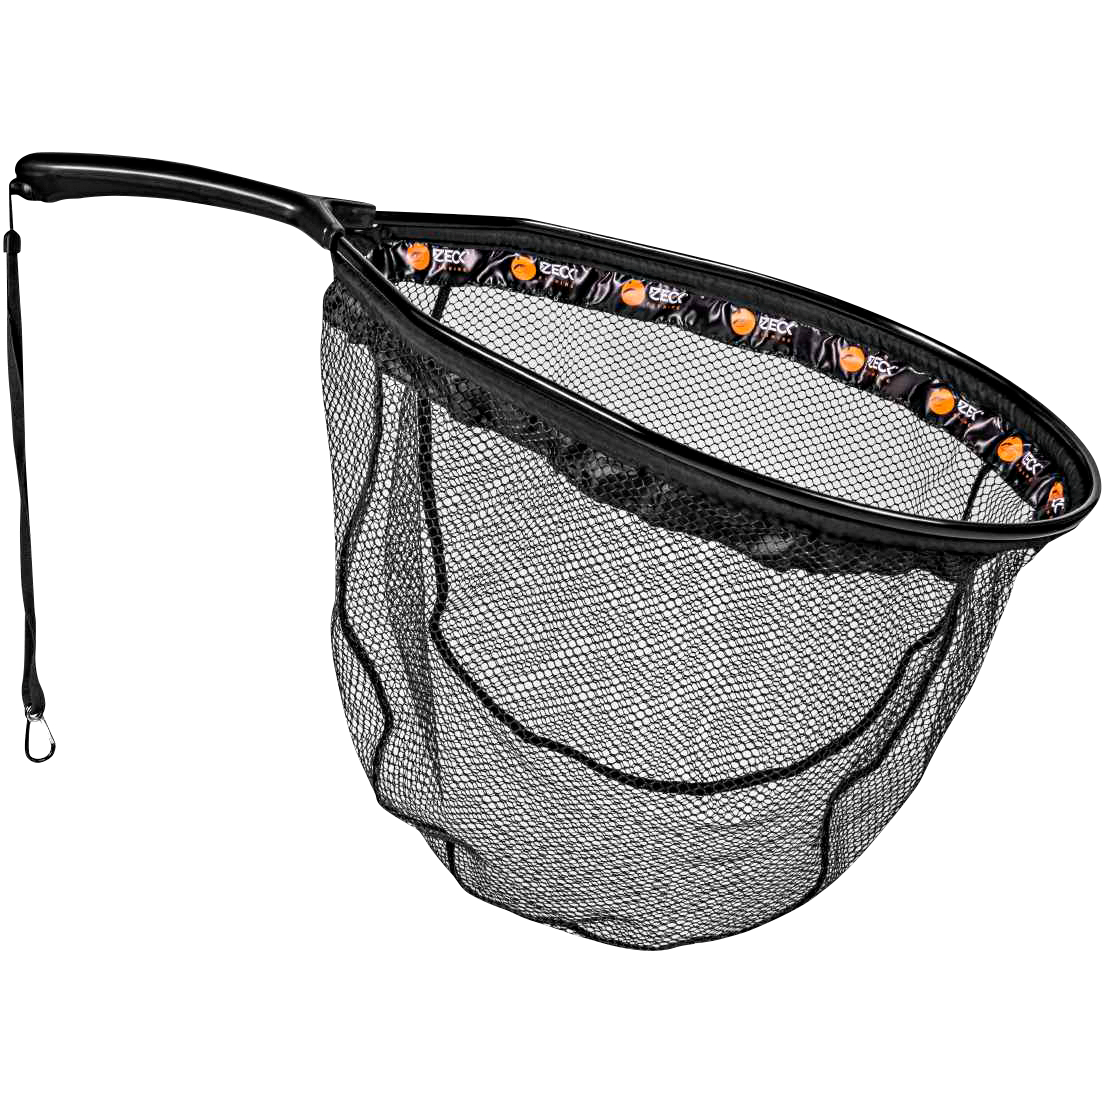 Zeck landing net Floating Rubber Net at low prices